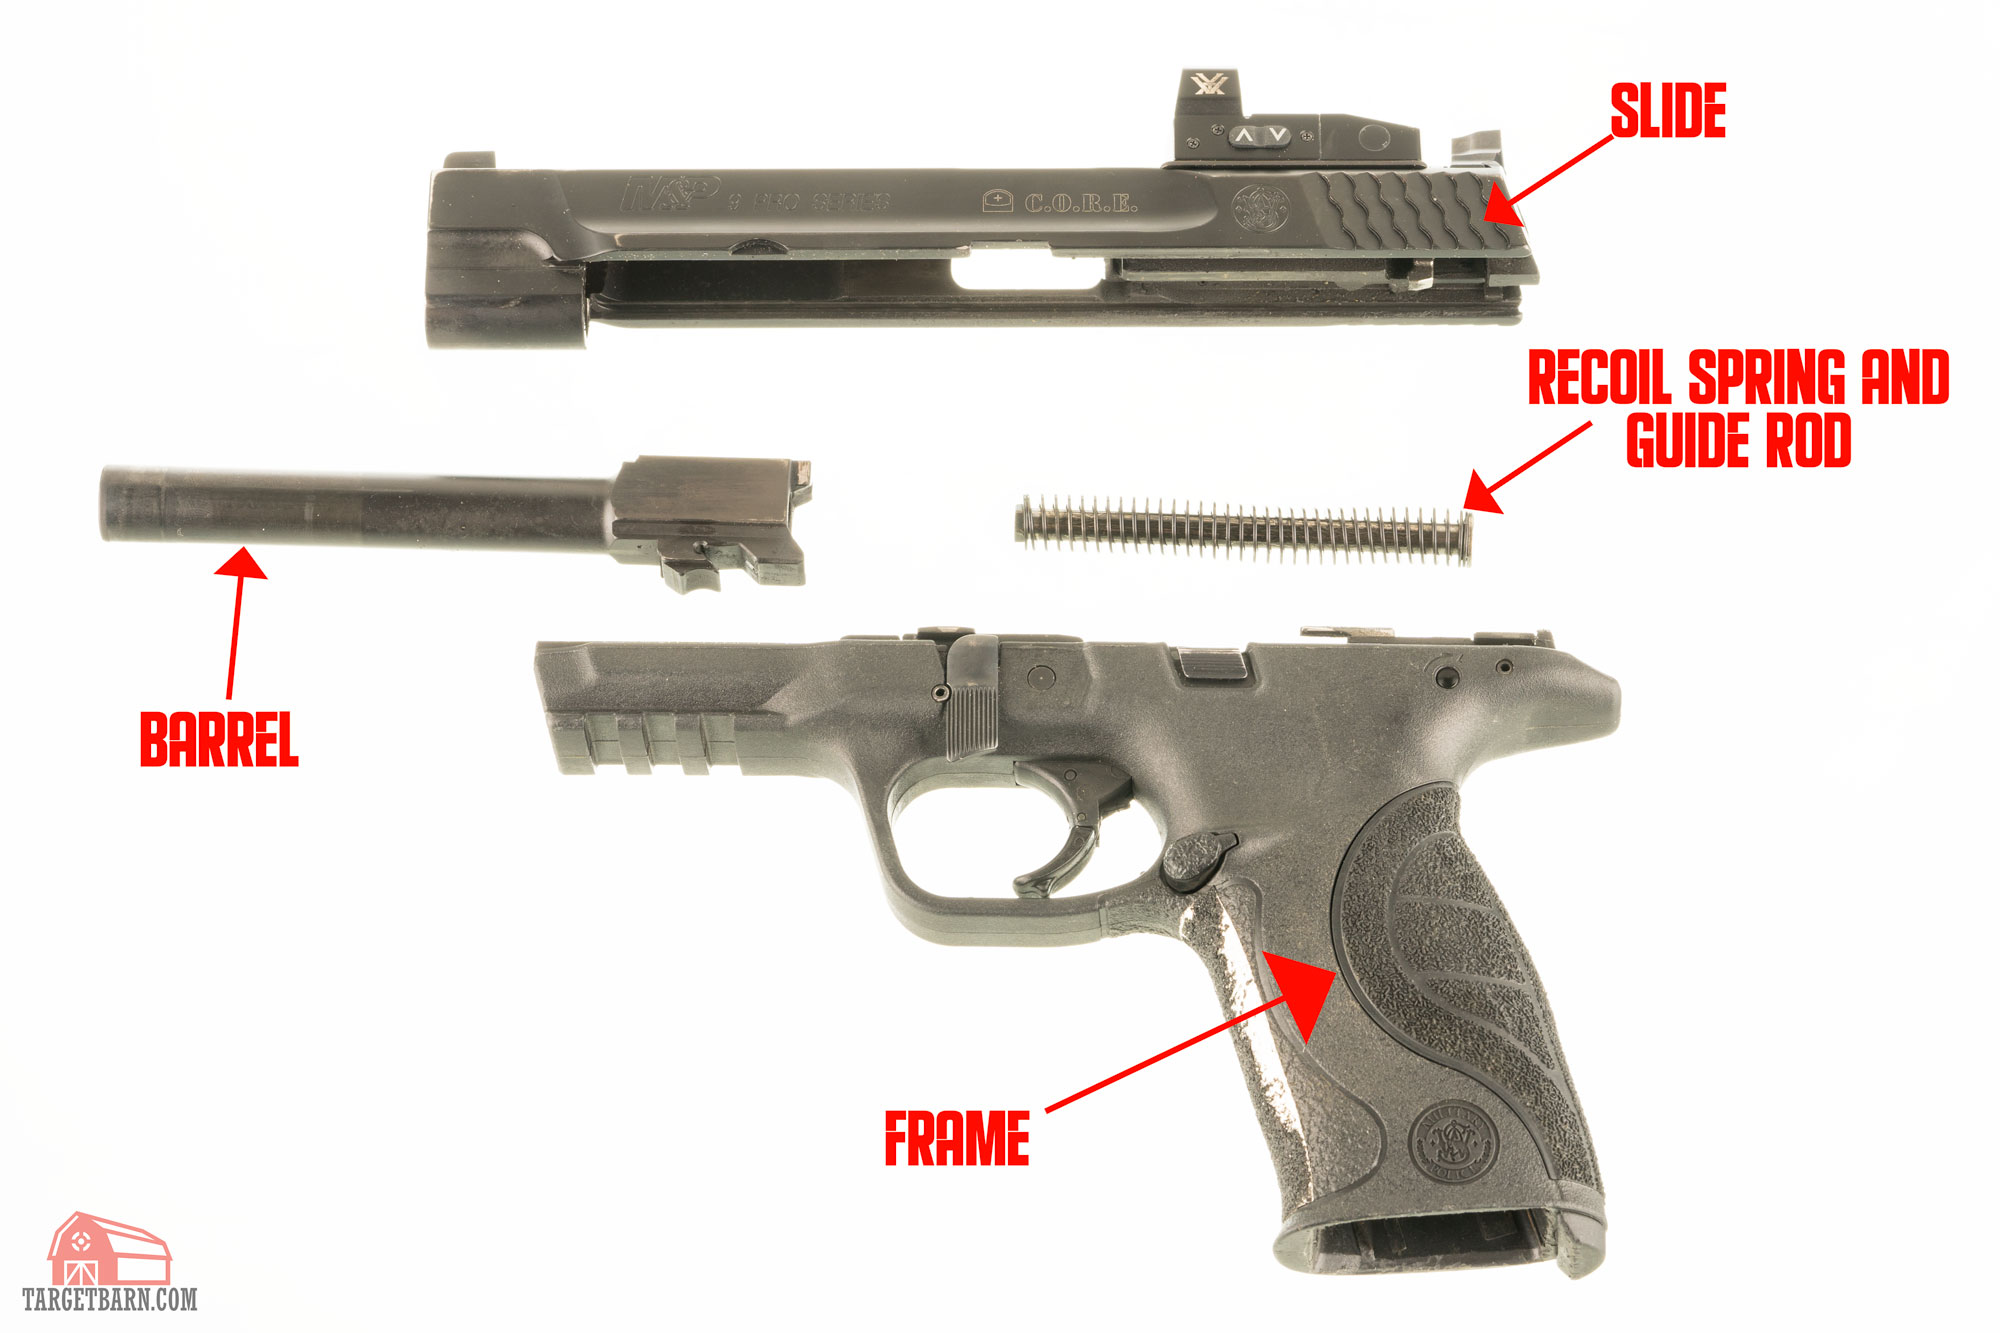 III. Basic Firearm Anatomy: Exploring the Different Parts